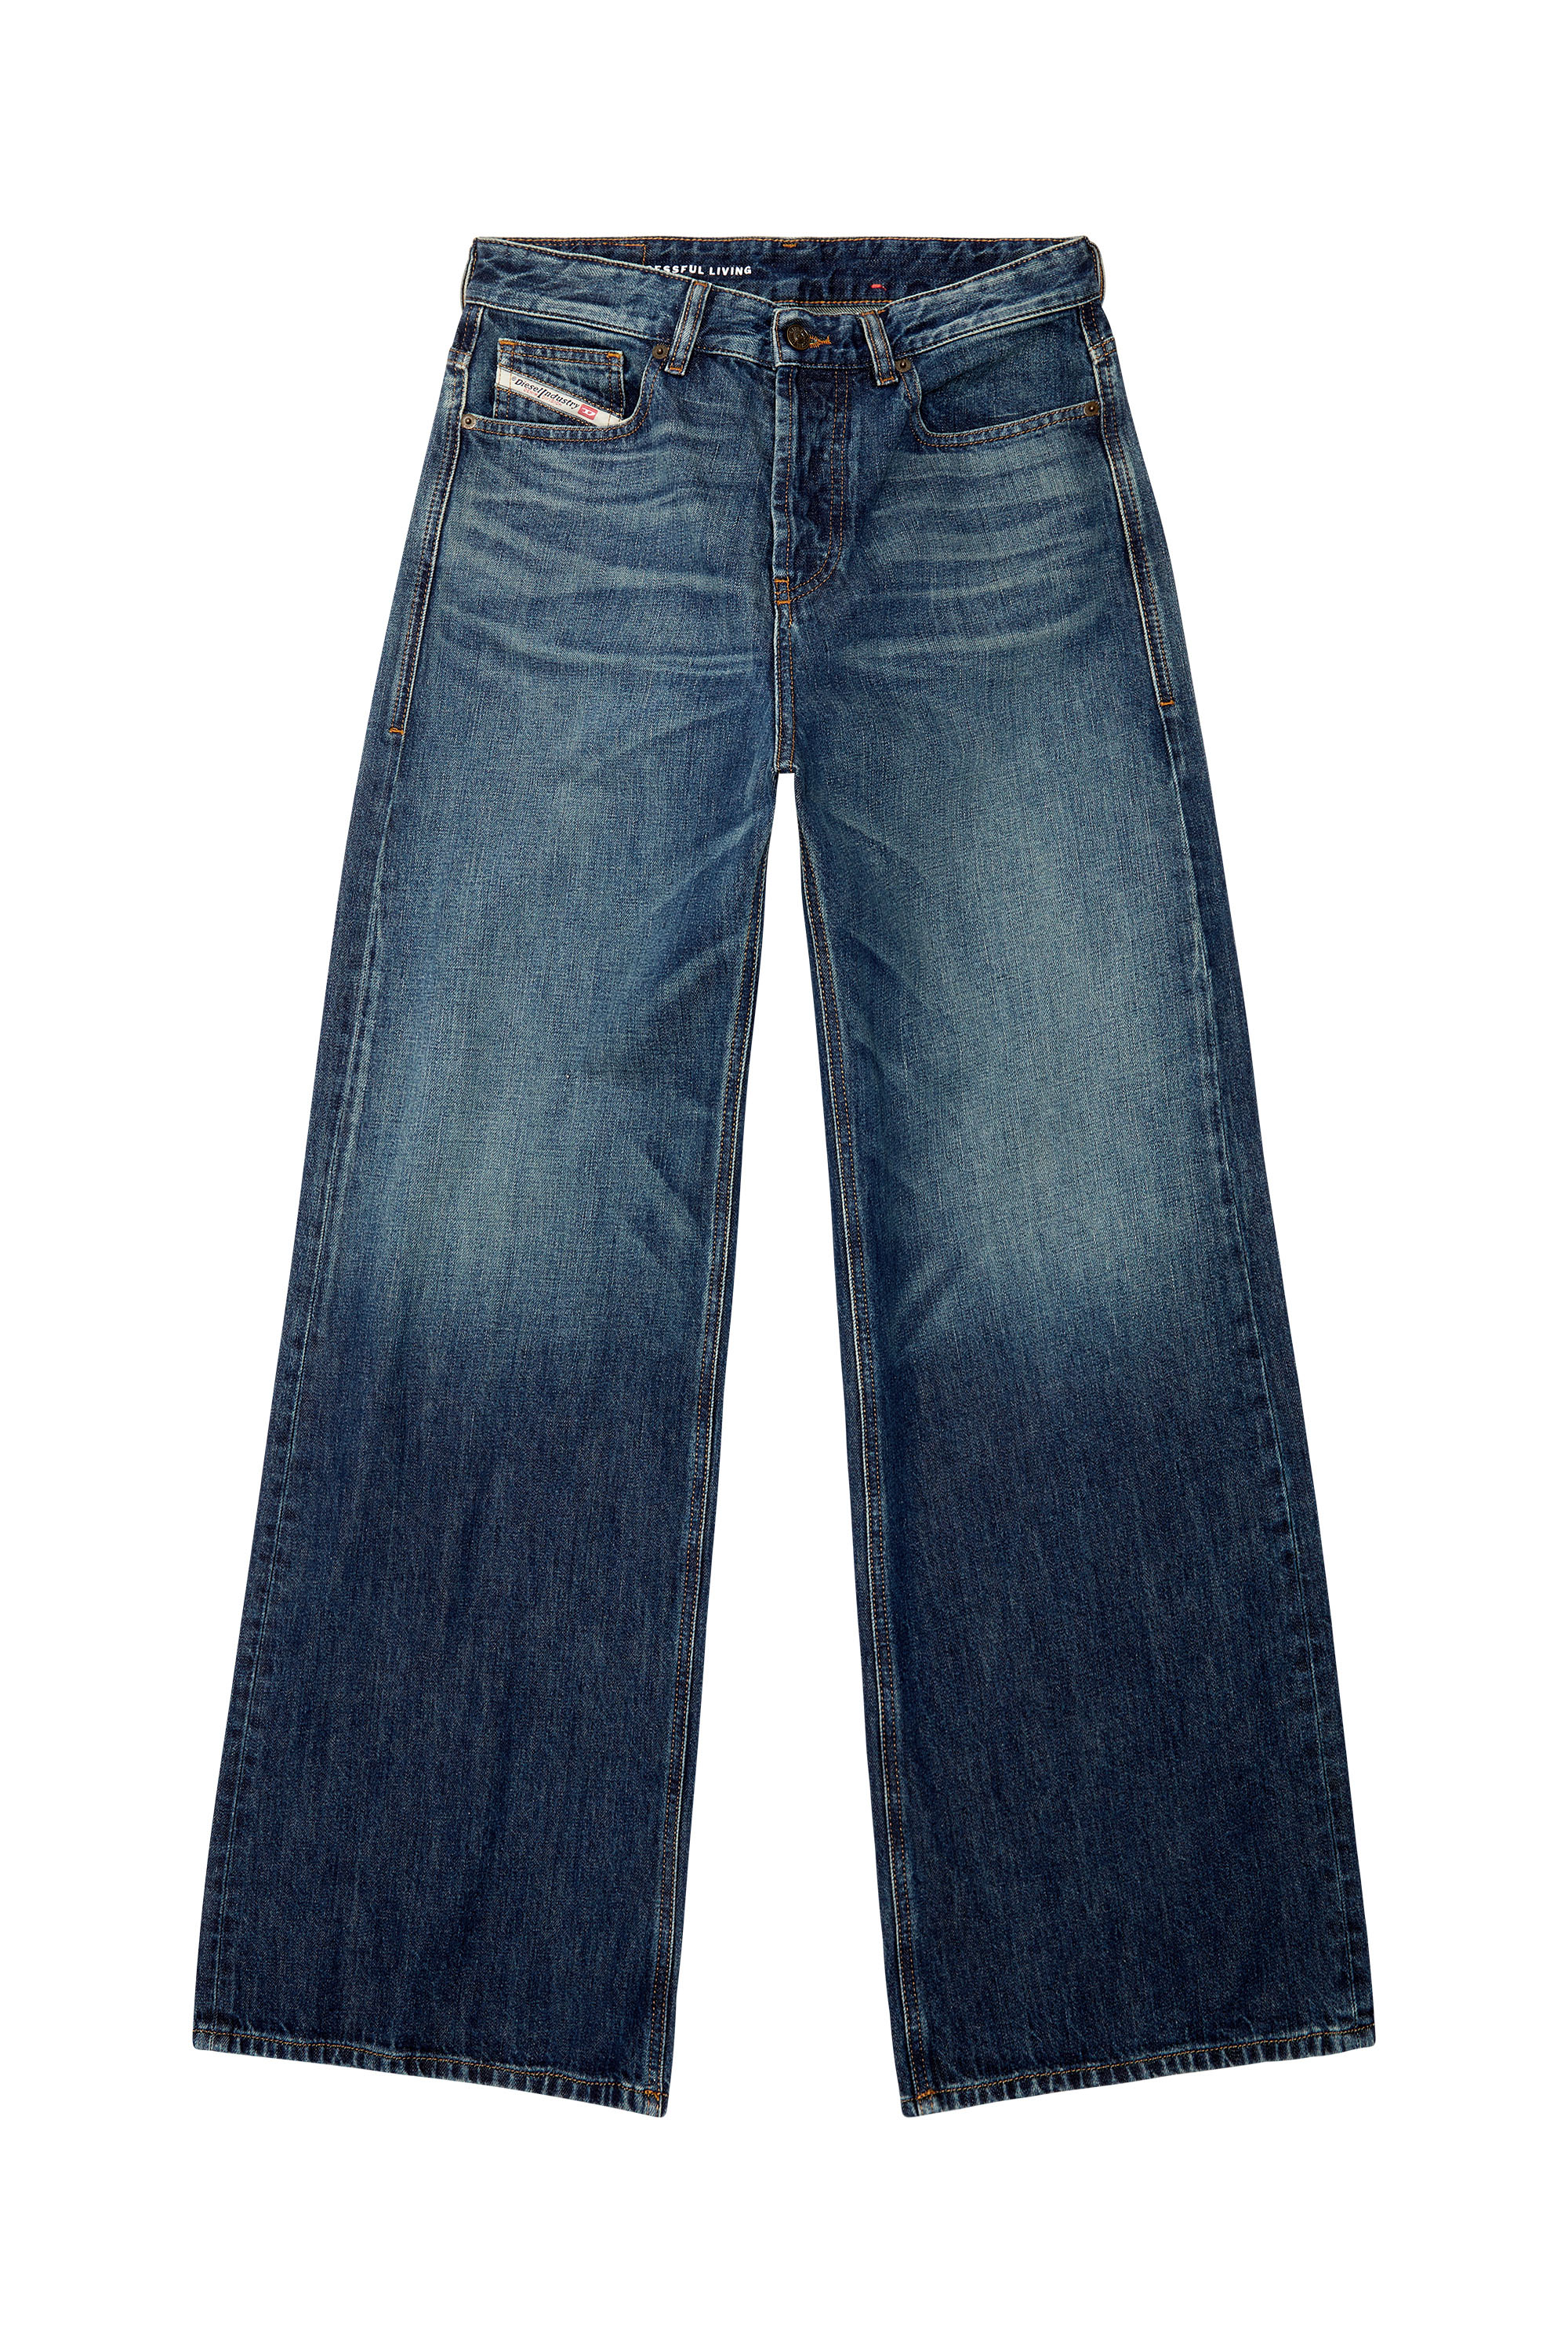 Diesel Women Jeans and Apparel: New Collection